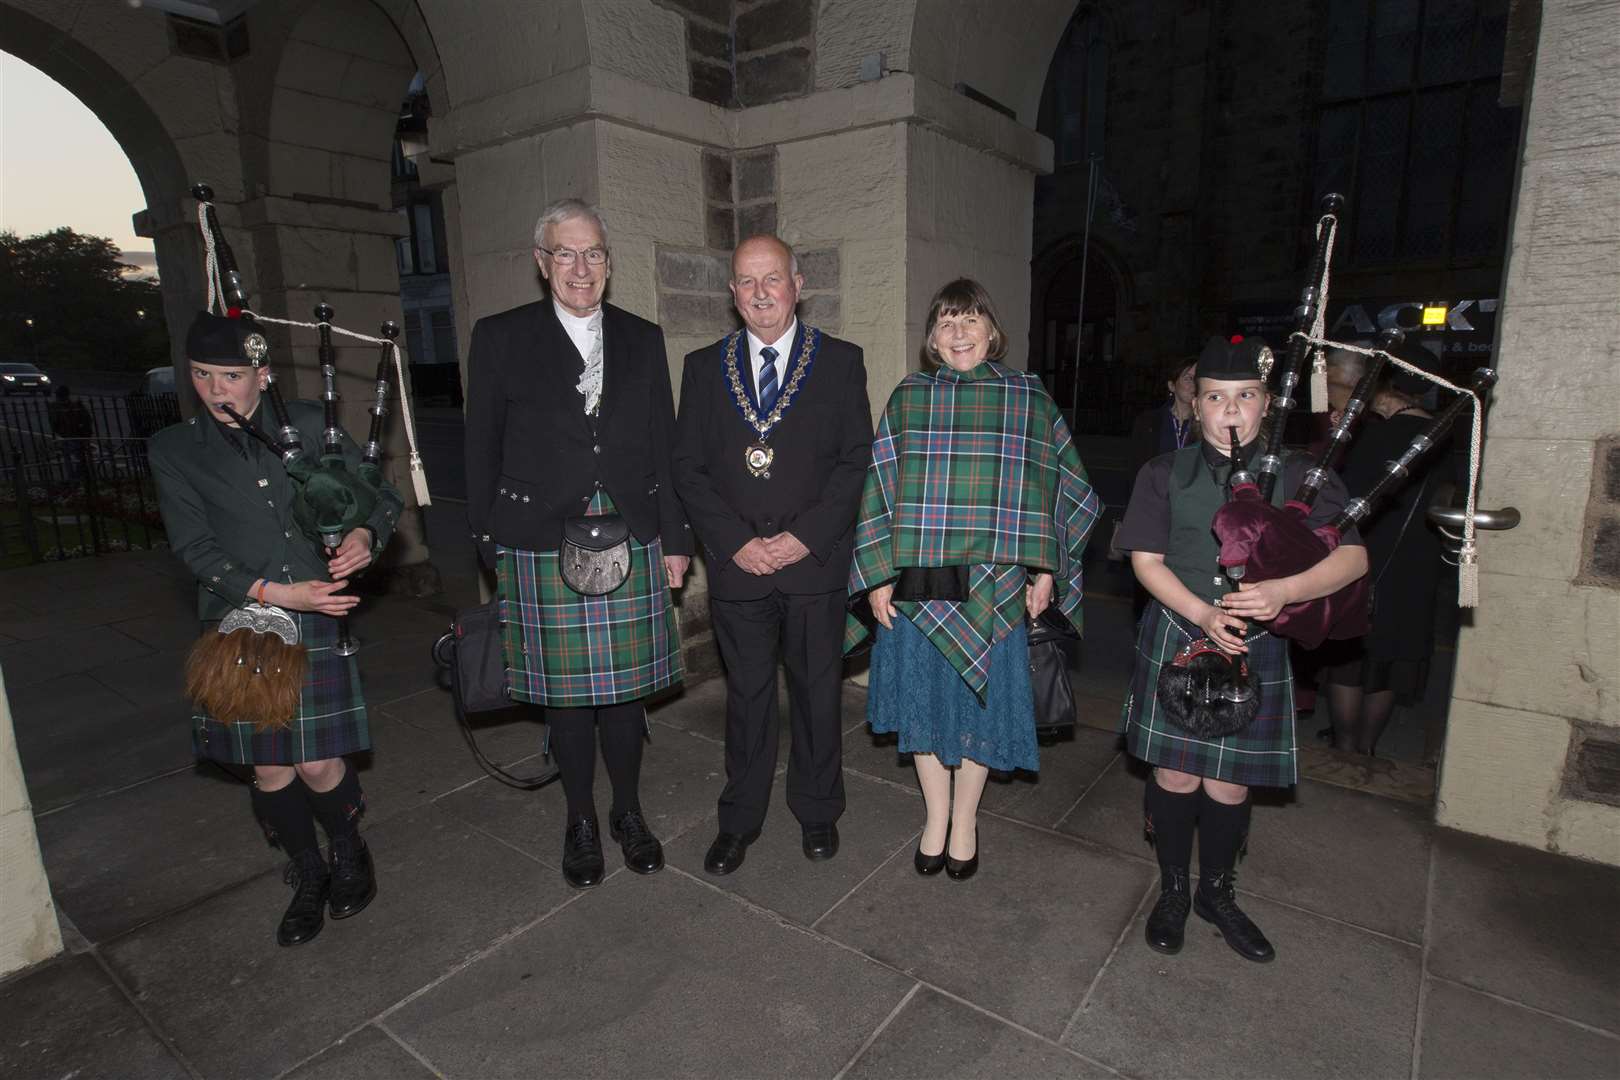 The Rt Rev Colin Sinclair and his wife Ruth are welcomed to a civic reception in Wick Town Hall by civic leader Councillor Willie Mackay and young pipers Glenn and Morven Miller, from Watten. Picture: Robert MacDonald / Northern Studios